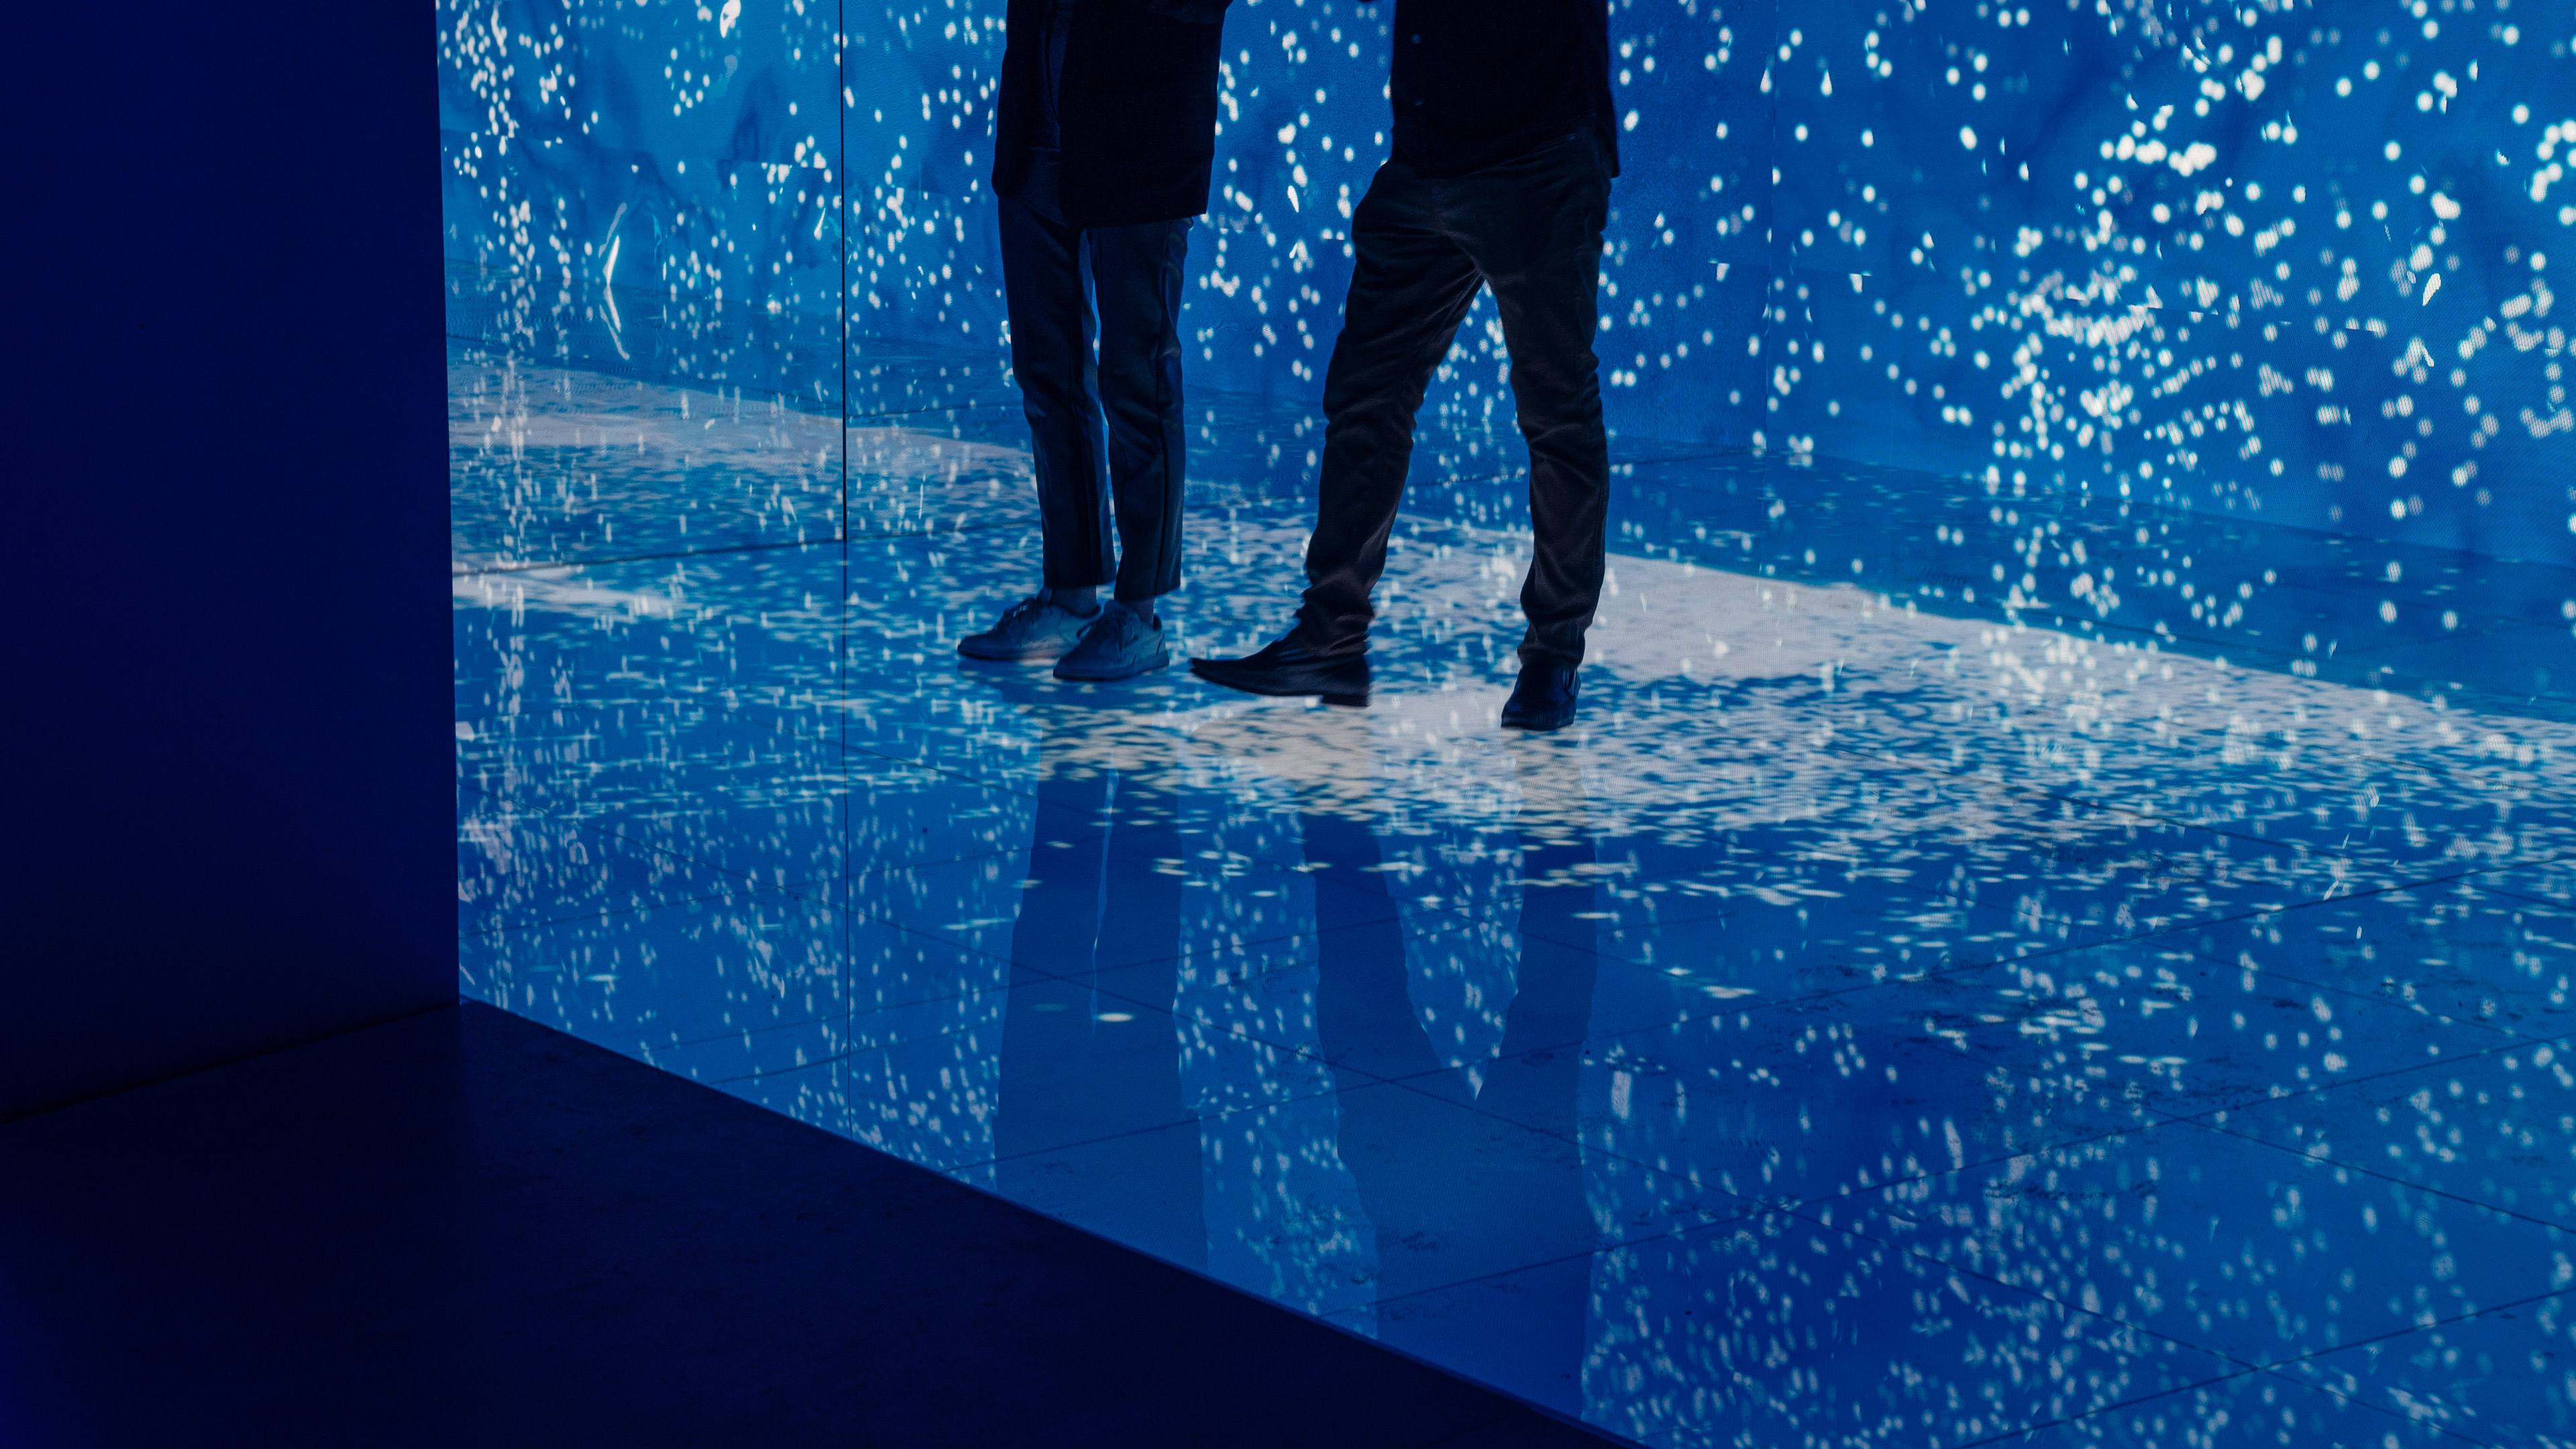 Two people standing on an led floor with dynamic water graphics